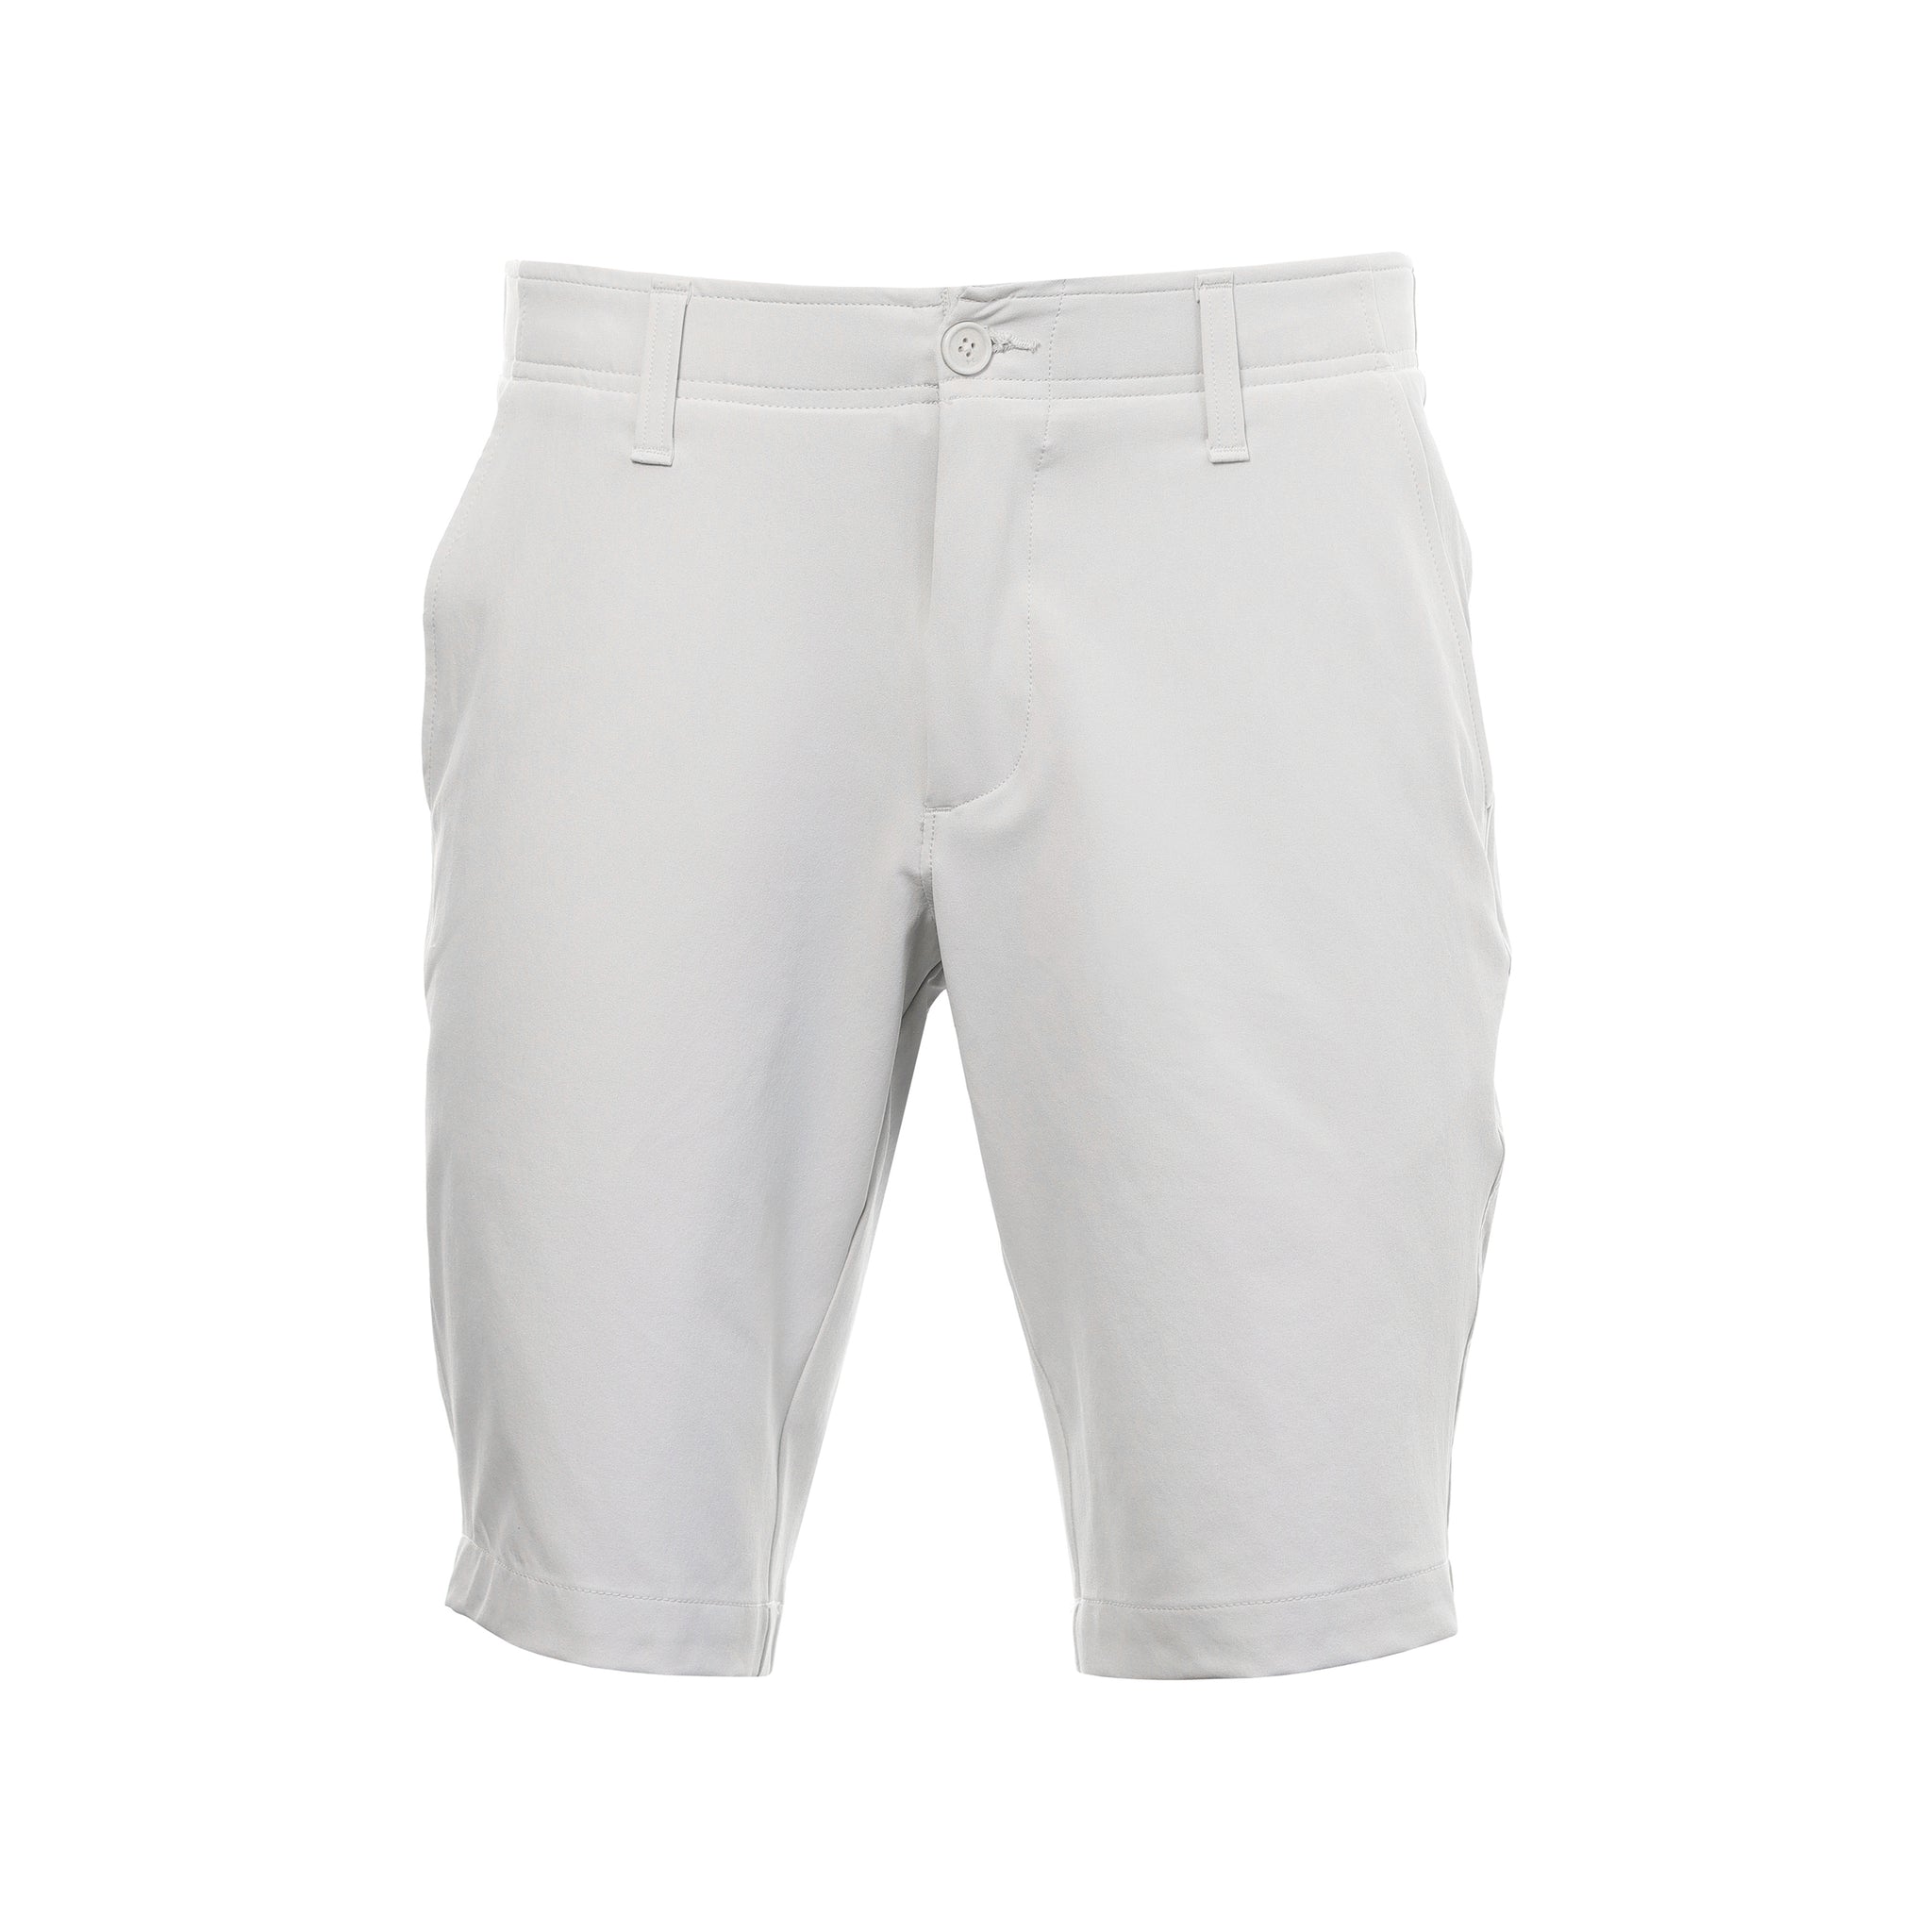 under-armour-golf-ua-drive-tapered-shorts-1370086-halo-grey-014